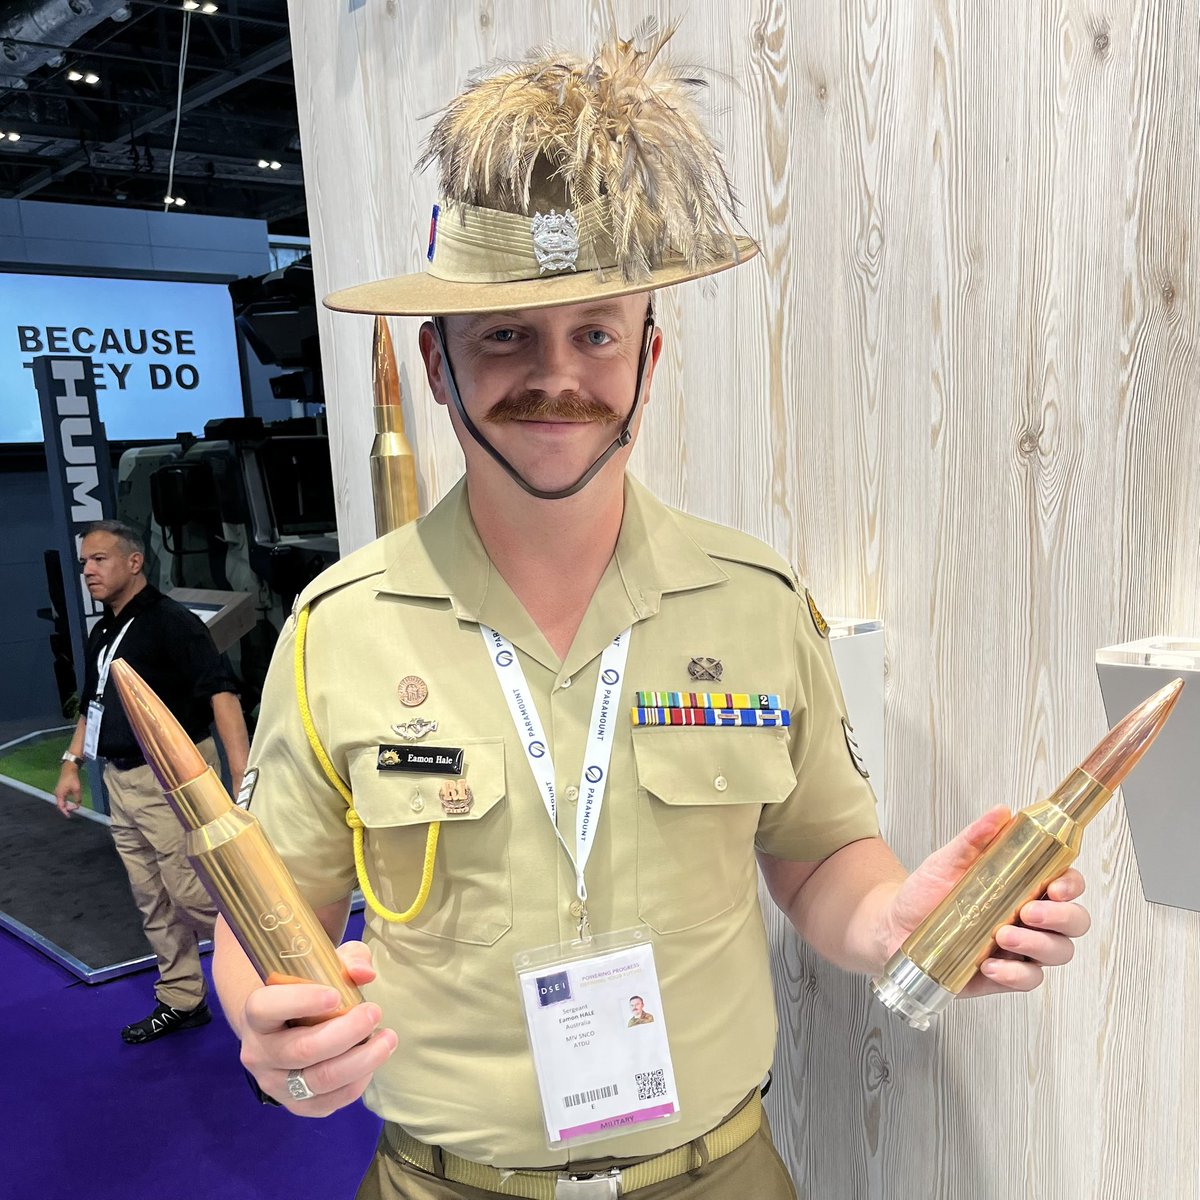 Really fascinating conversation with @2805662 at #DSEI23 on the @sigsauerinc stand.
My big takeaway was that what matters in the future was “cartridge not caliber”. Great explanation of the HUGE benefits a hybrid steel/brass case has over conventional brass by almost doubling PSI